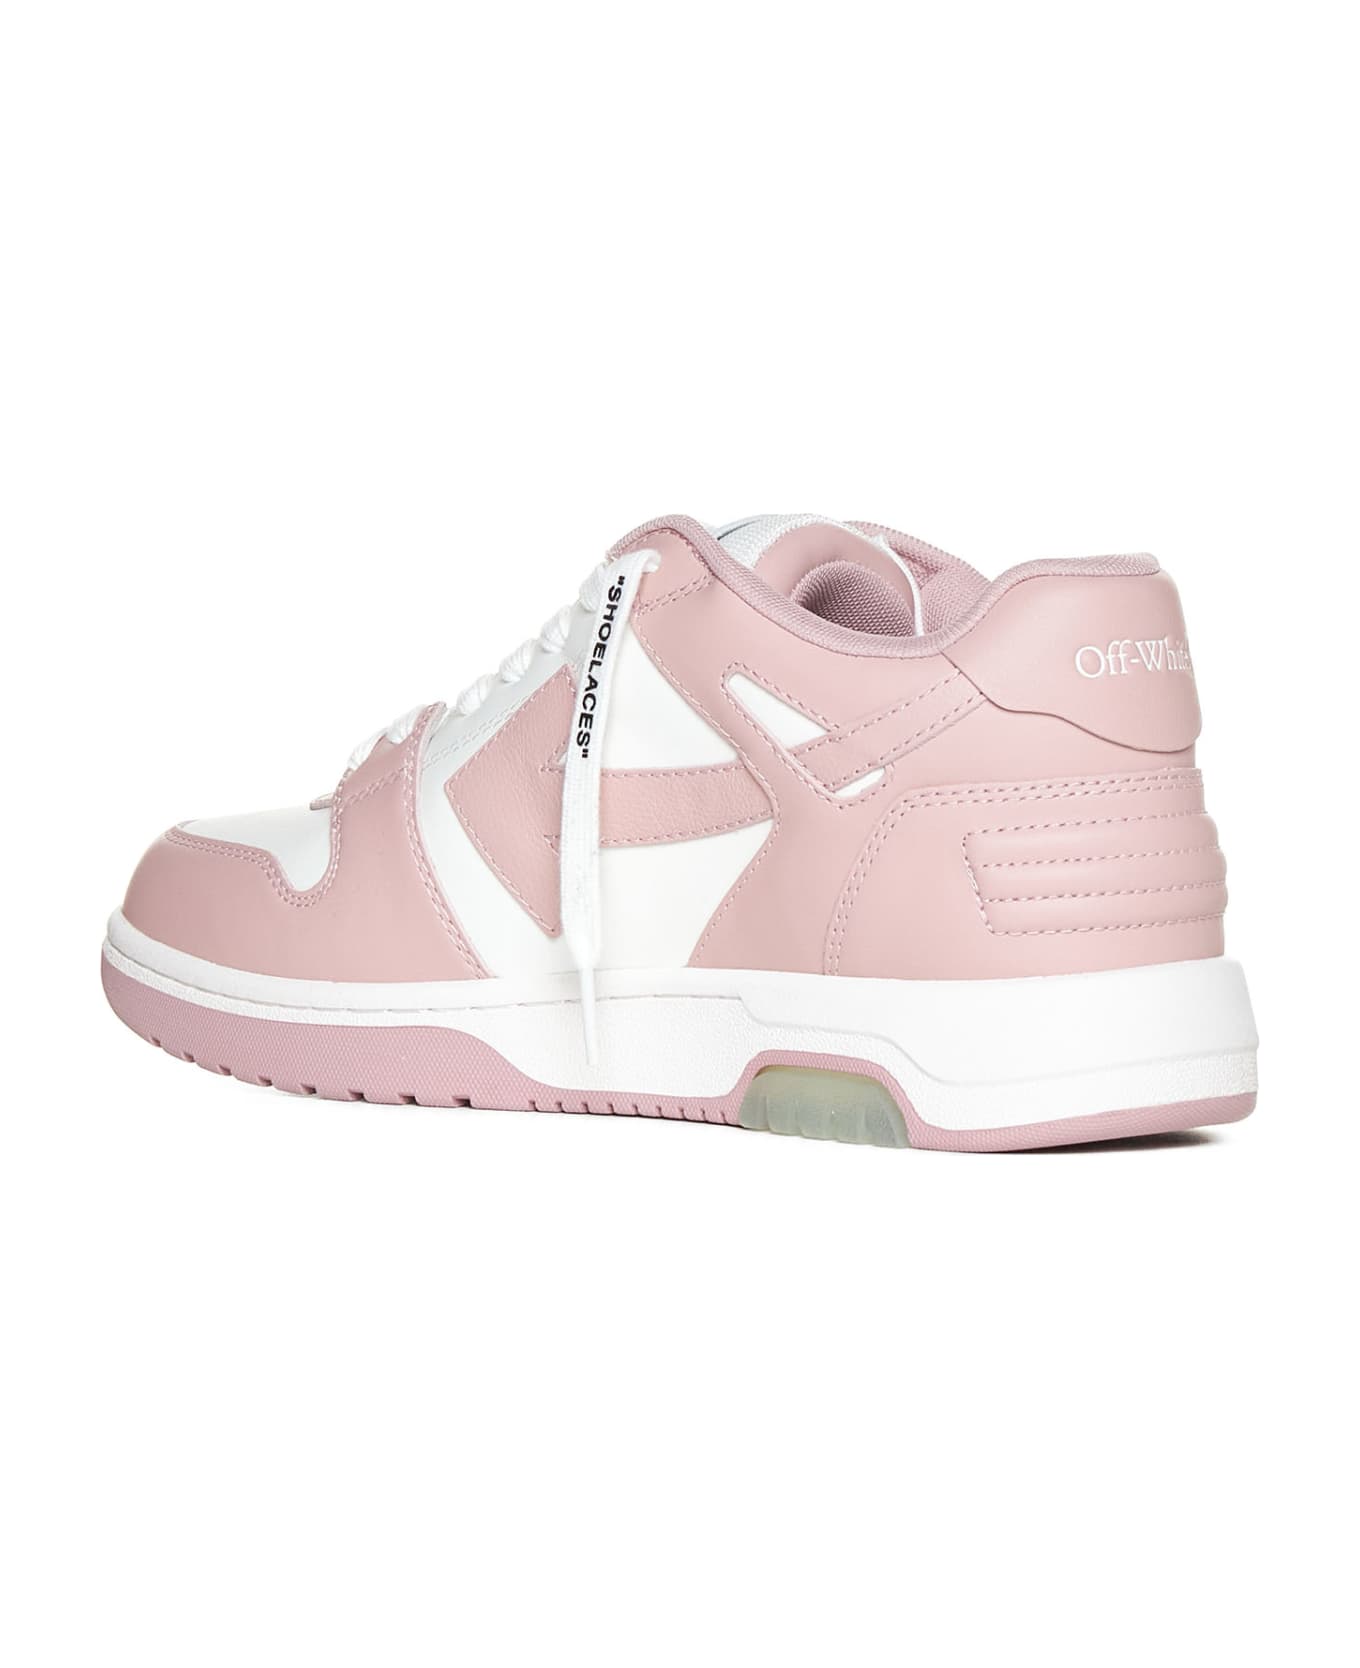 Off-White Out Of Office Sneakers - White Pink スニーカー